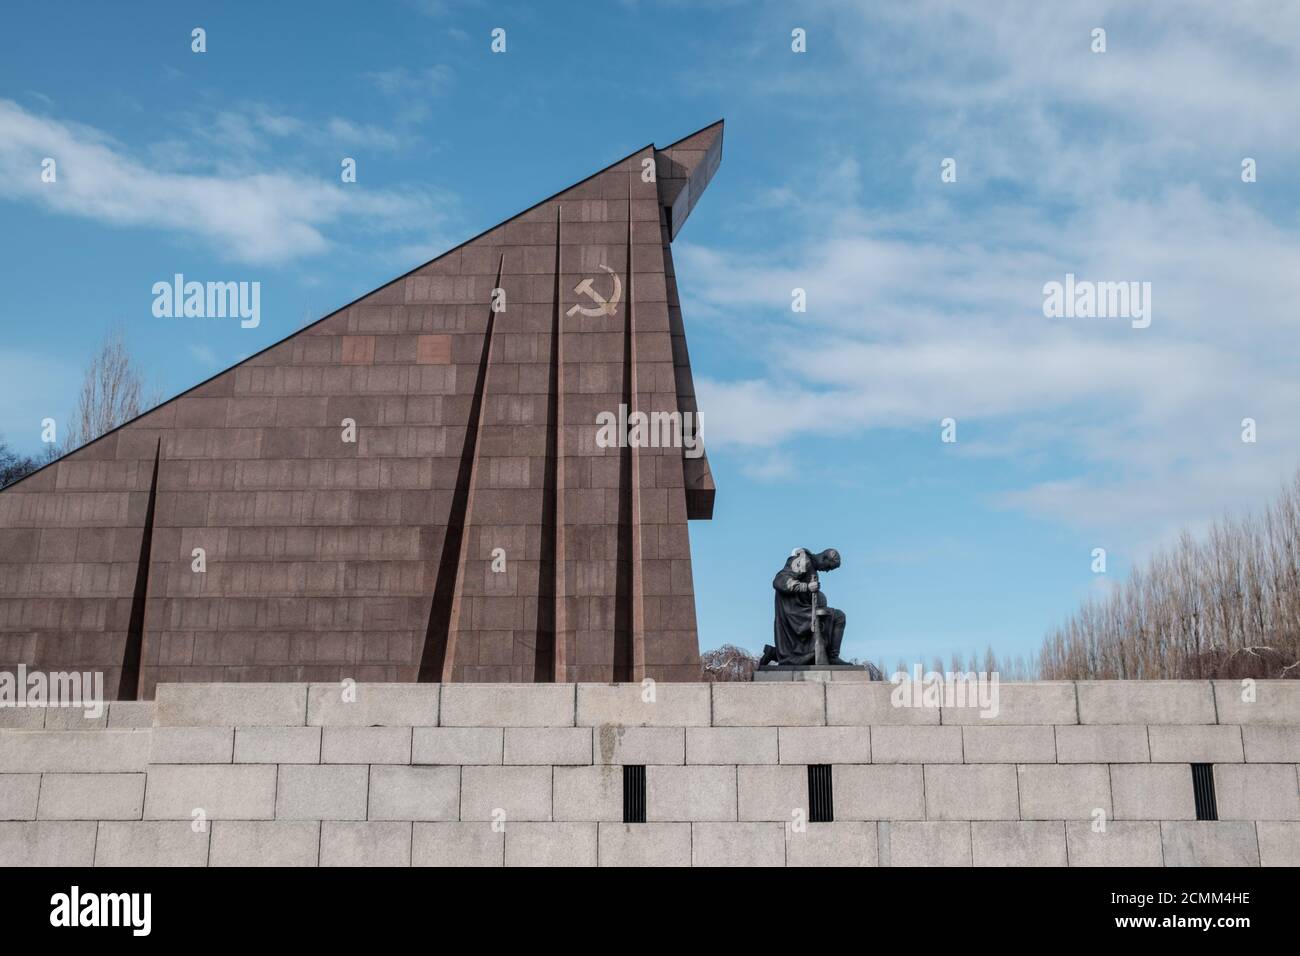 The Soviet War Memorial (Sowjetisches Ehrenmal) in Treptower Park, built in memory of the Red Army soldiers fallen in battle during WWII, Berlin Stock Photo